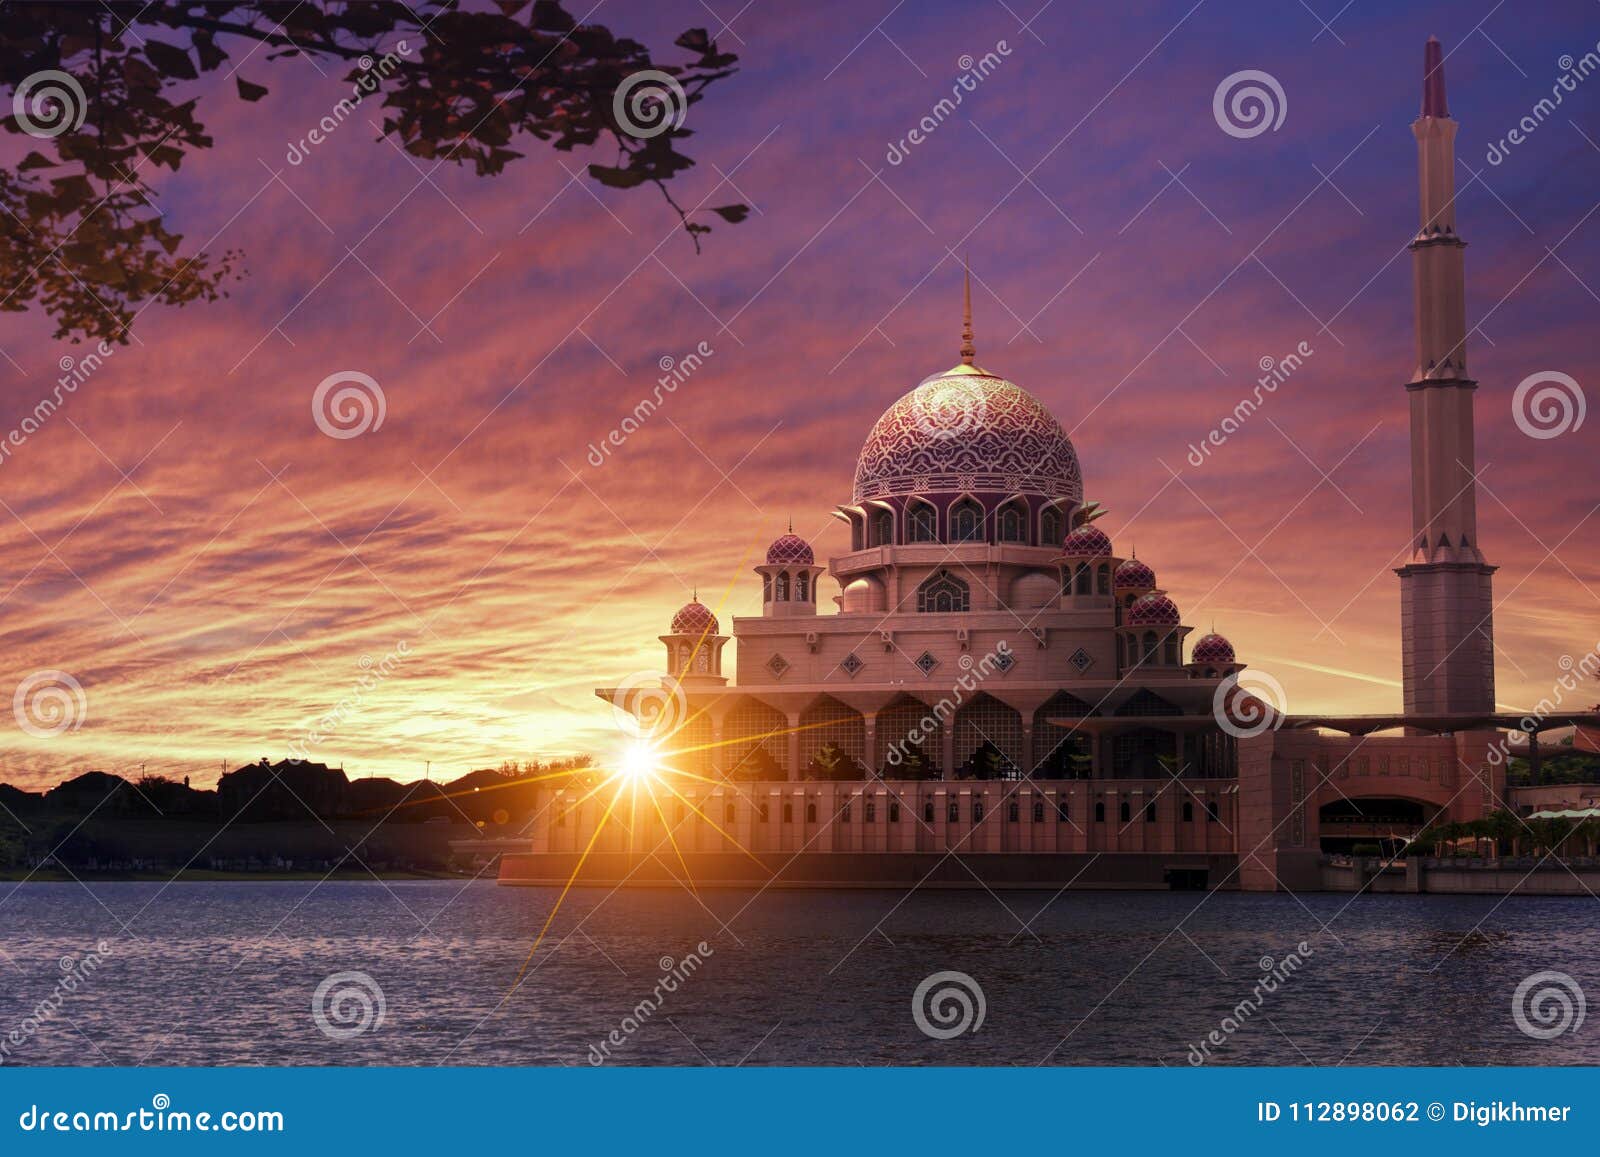 sunset at the classic mosque